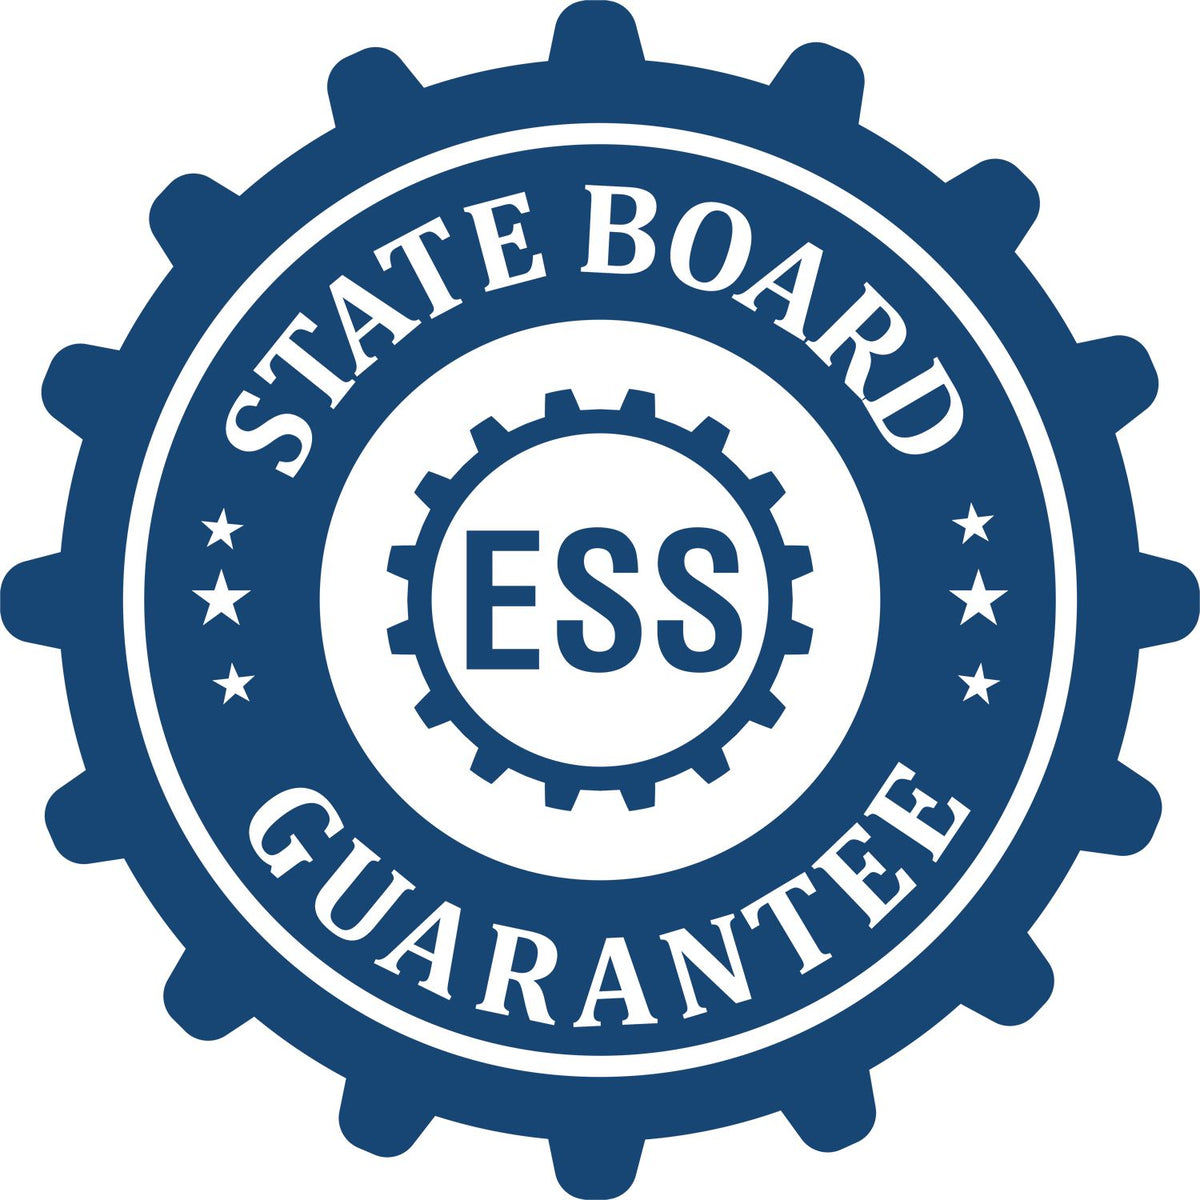 An emblem in a gear shape illustrating a state board guarantee for the Hybrid Louisiana Landscape Architect Seal